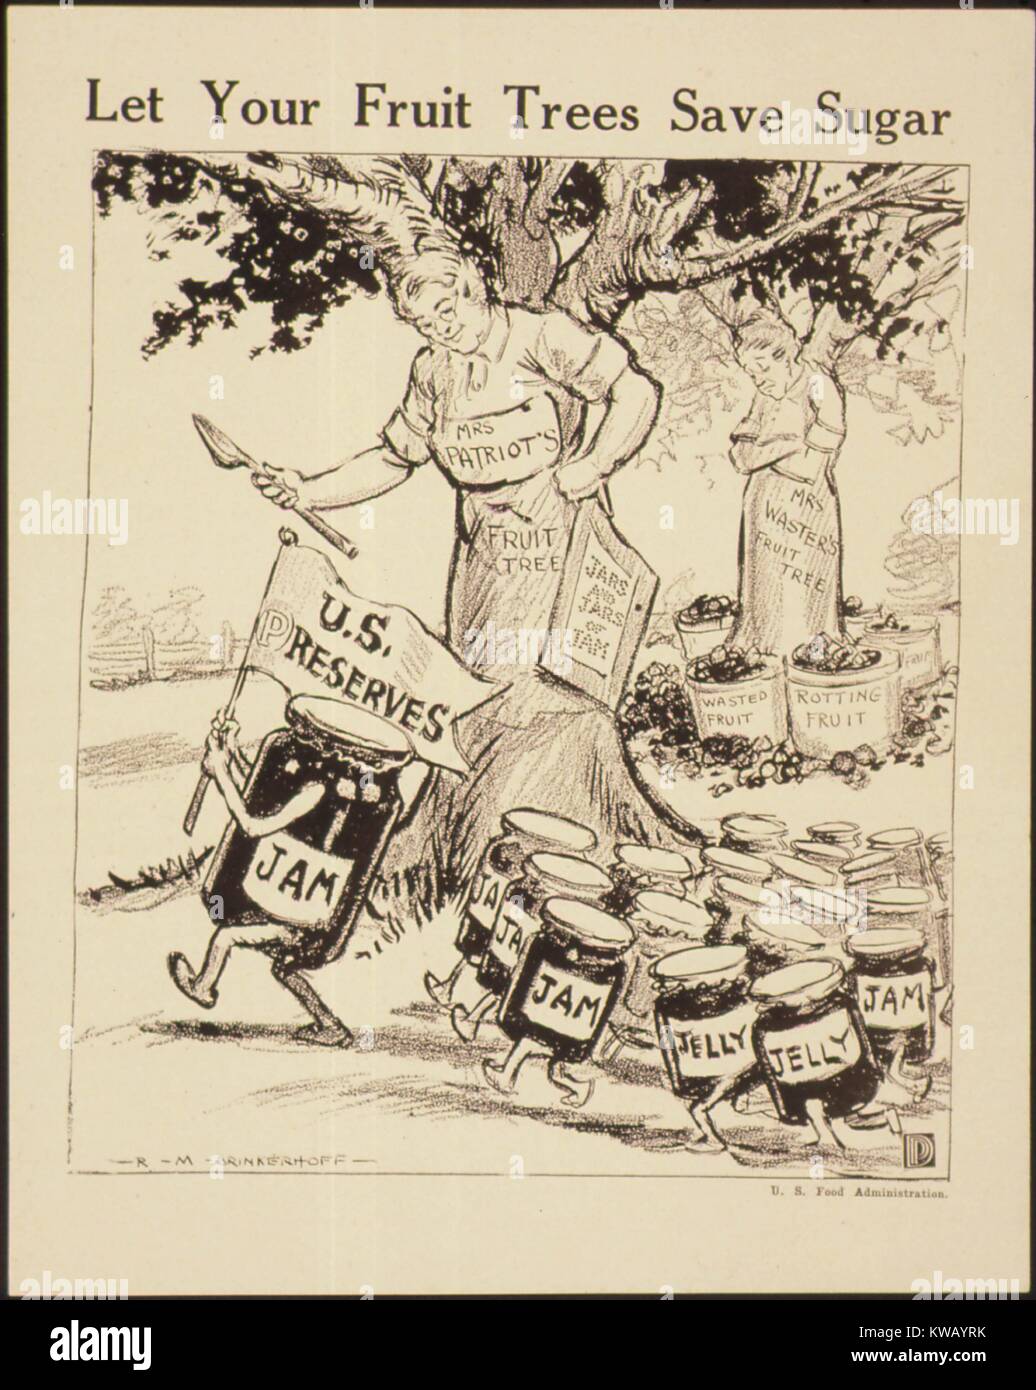 Poster from World War I entitled 'Let Your Fruit Trees Save Sugar, ' encouraging jam production and food rationing for United States war causes, 1917. Image courtesy National Archives. Stock Photo